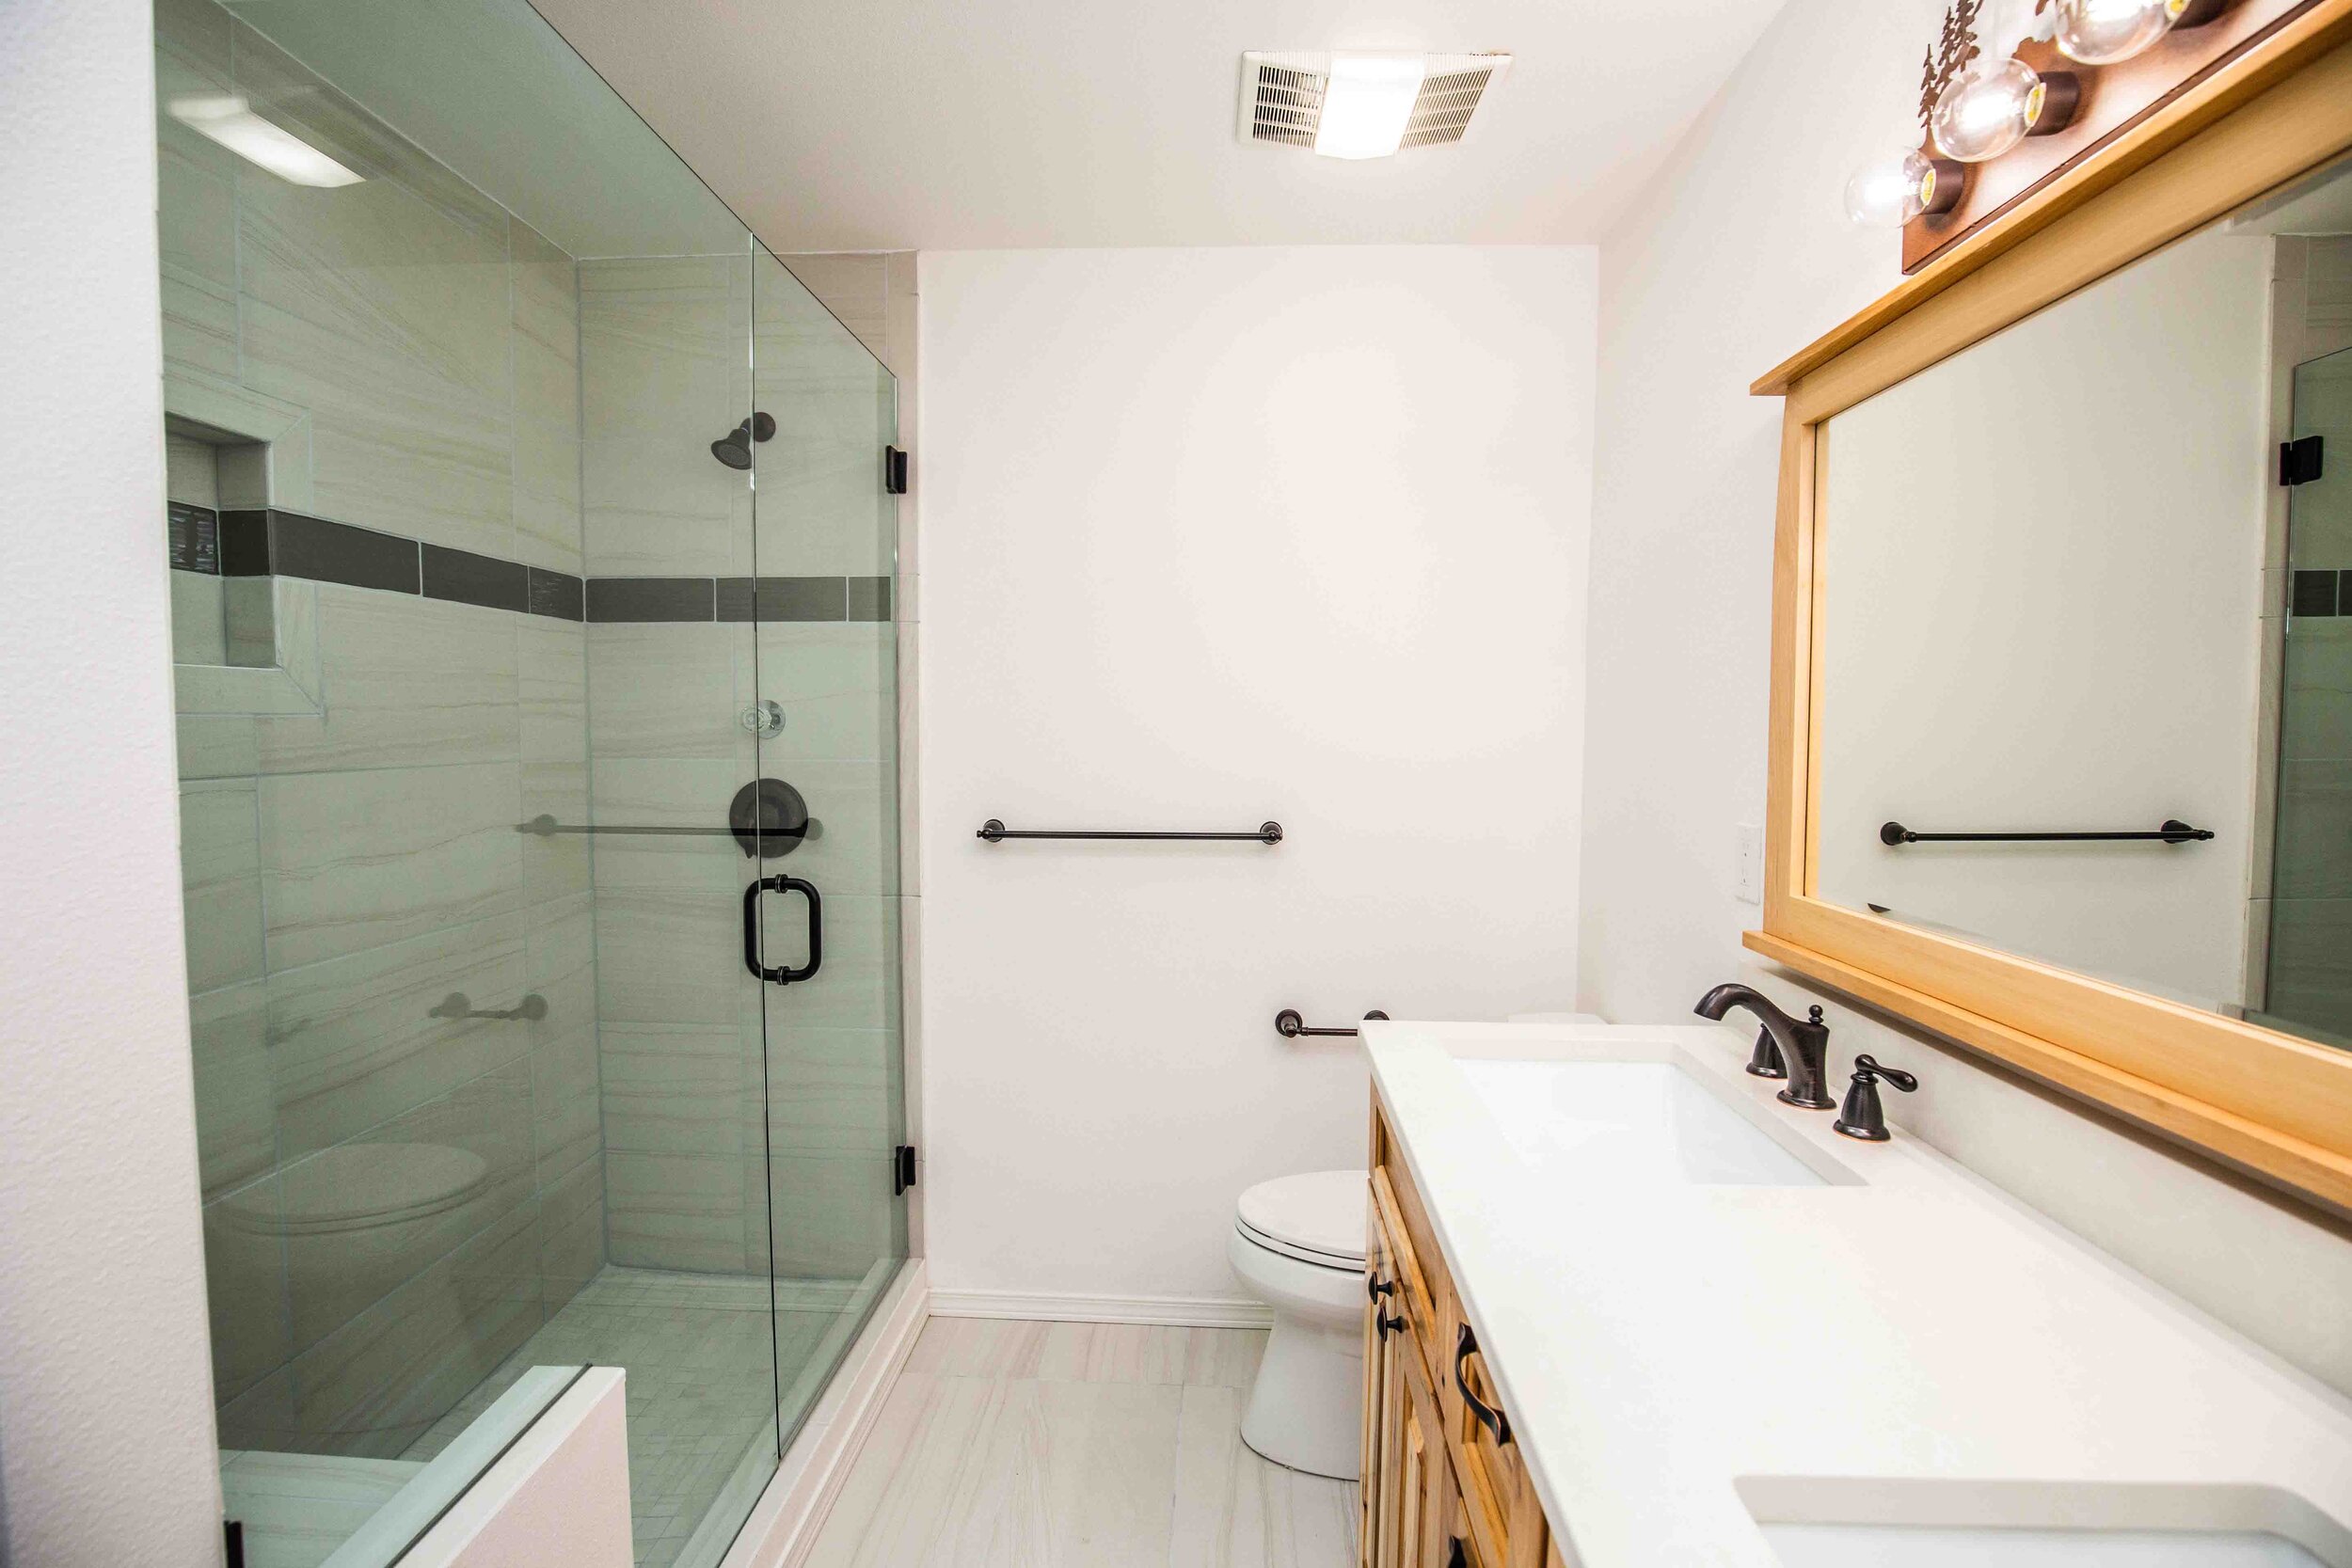 The scope included a large primary ensuite restoration, incorporating the cabin-style aesthetics.